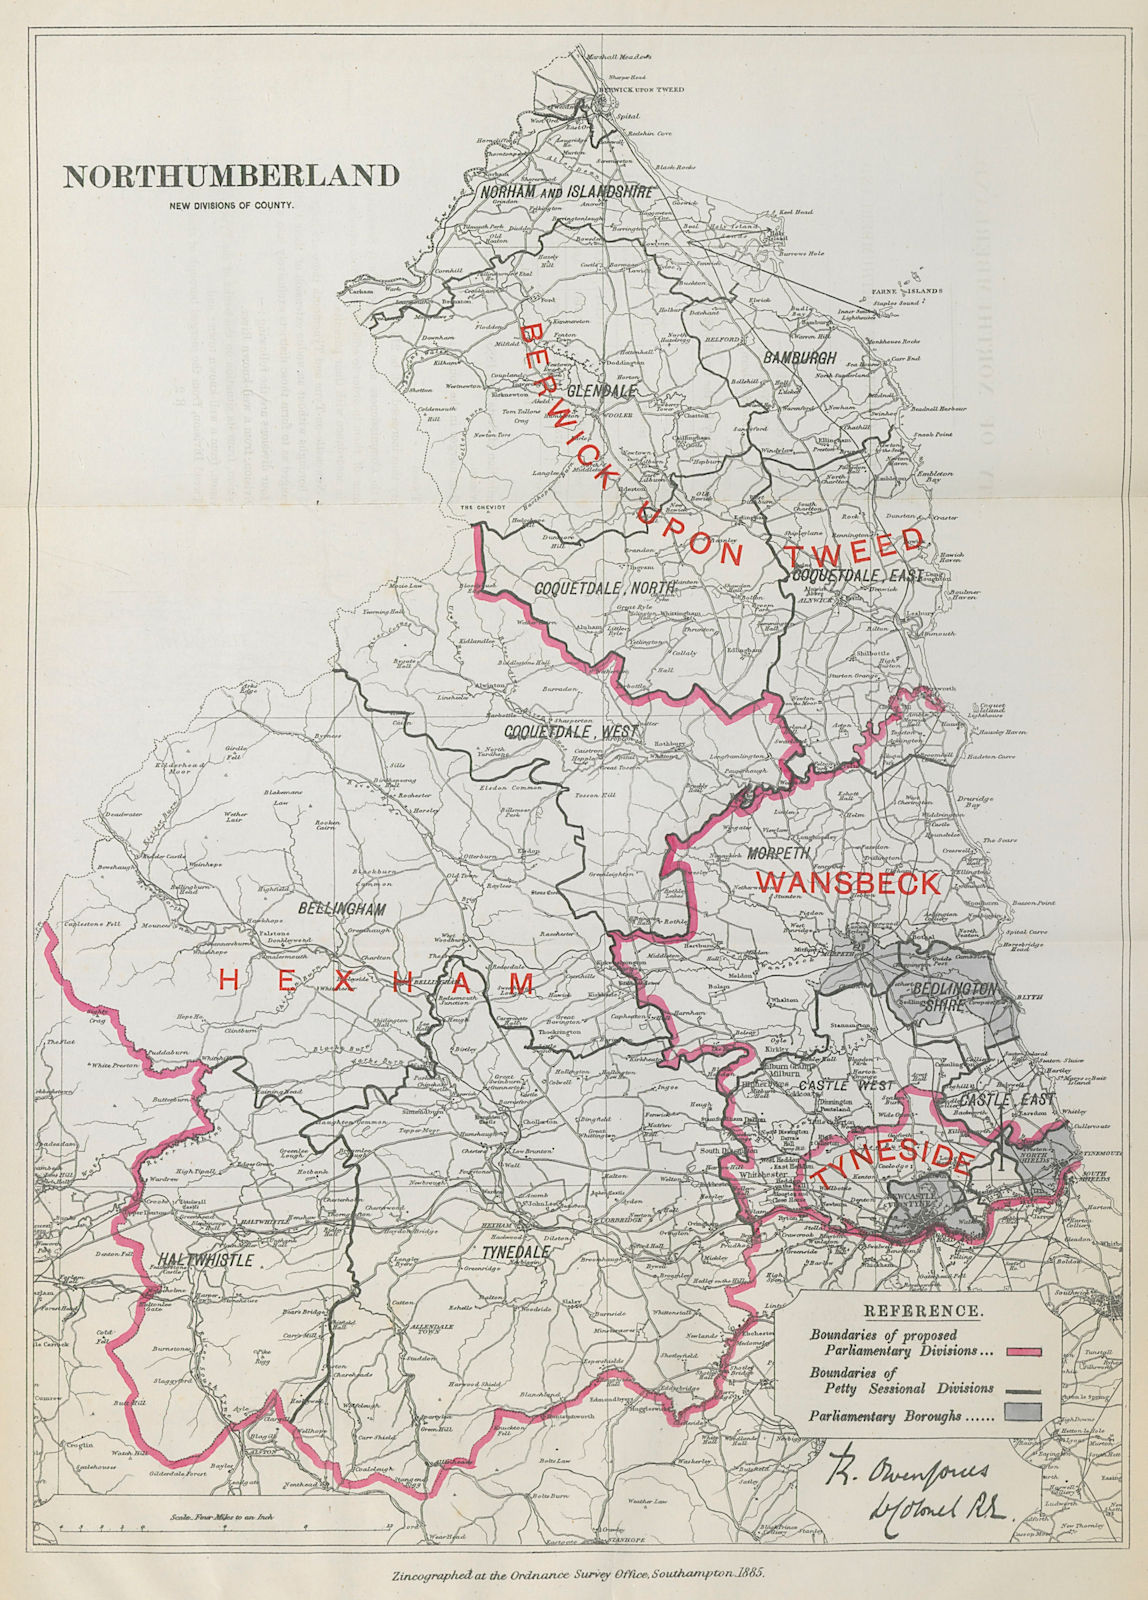 Associate Product Northumberland Parliamentary Divisions. Tyneside. BOUNDARY COMMISSION 1885 map